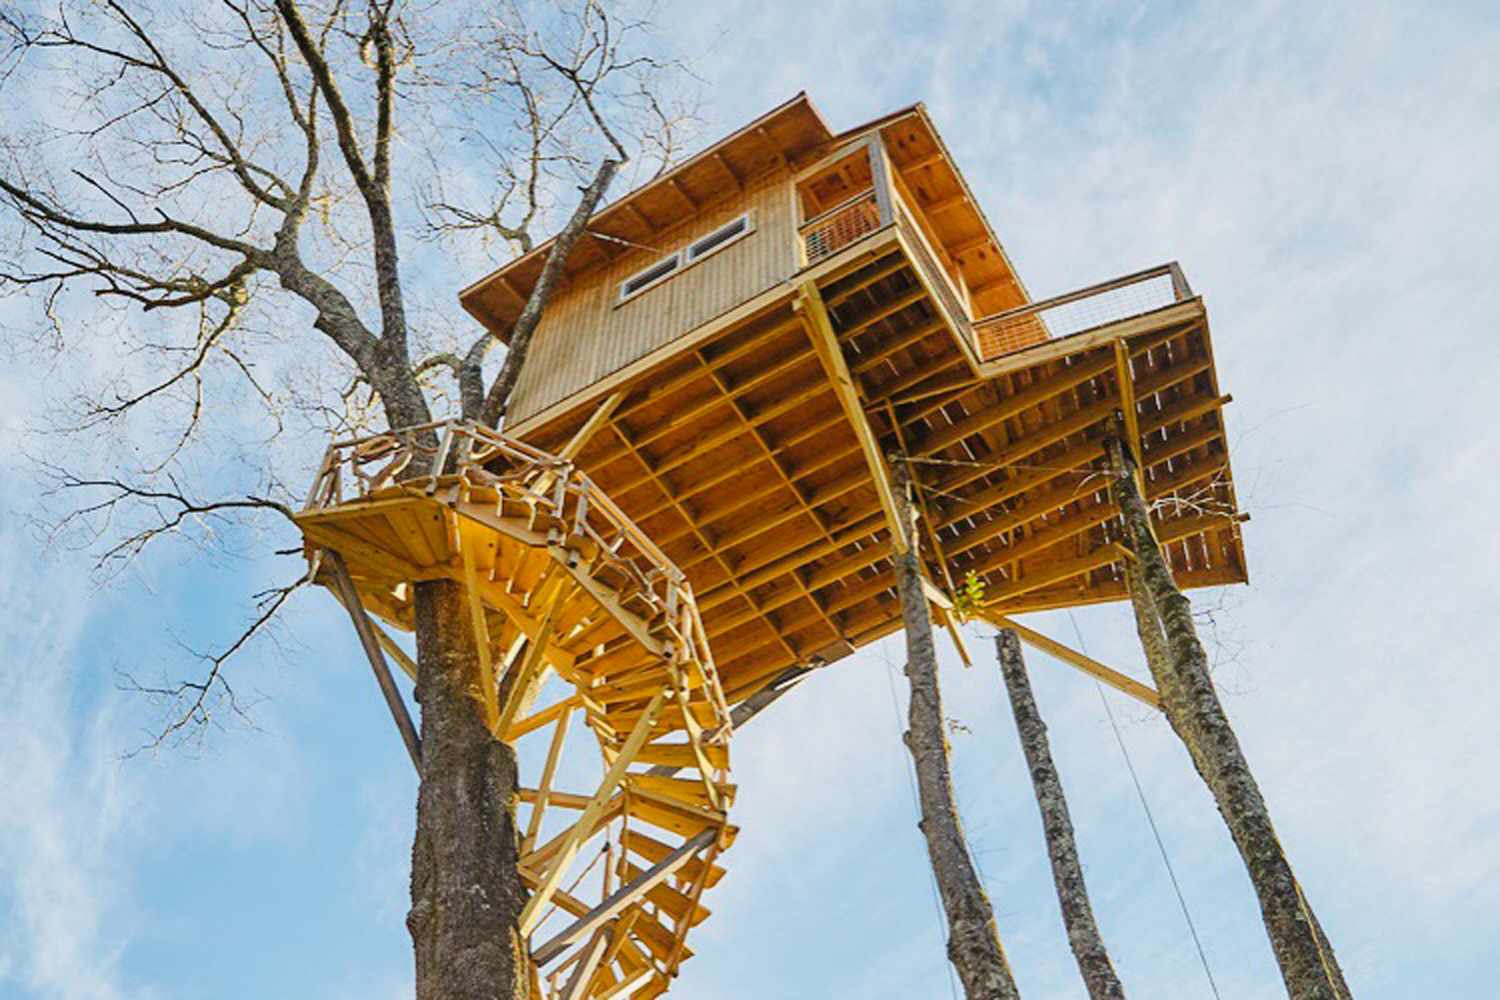  This Whimsical Tree House Airbnb in North Carolina Comes With 40 Acres of Private Land on a Wildlife Reserve 